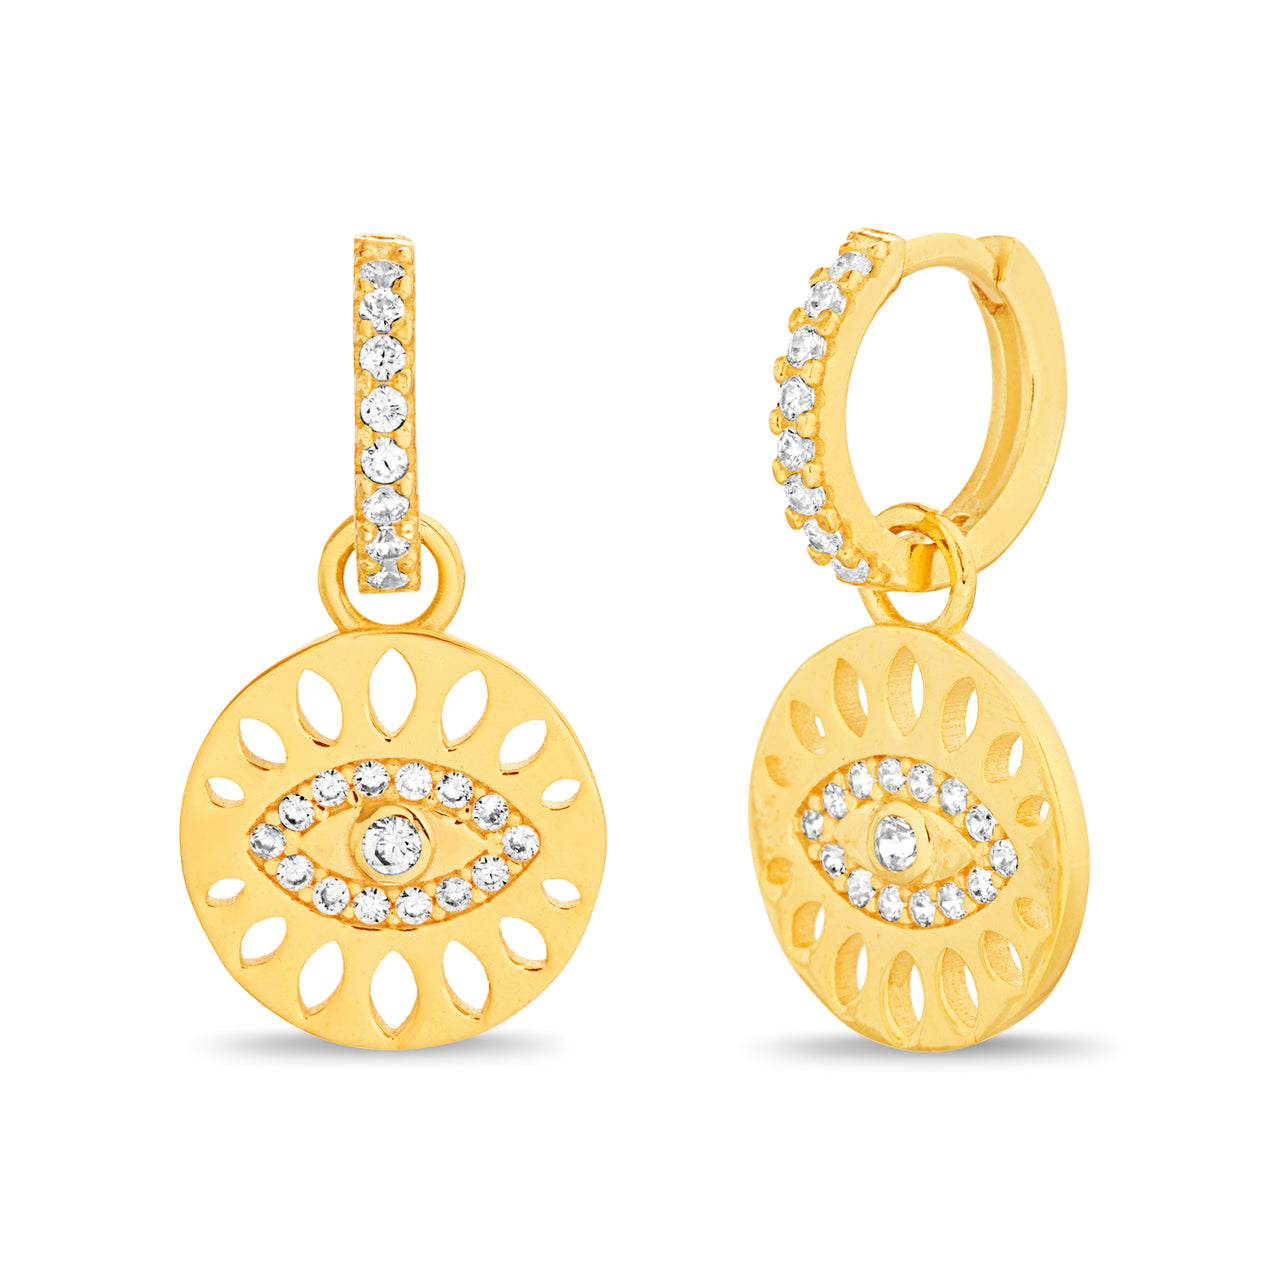 Lesa Michele Evil Eye Dangle Huggie Earrings in Yellow Gold Plated Sterling Silver with Cubic Zirconia